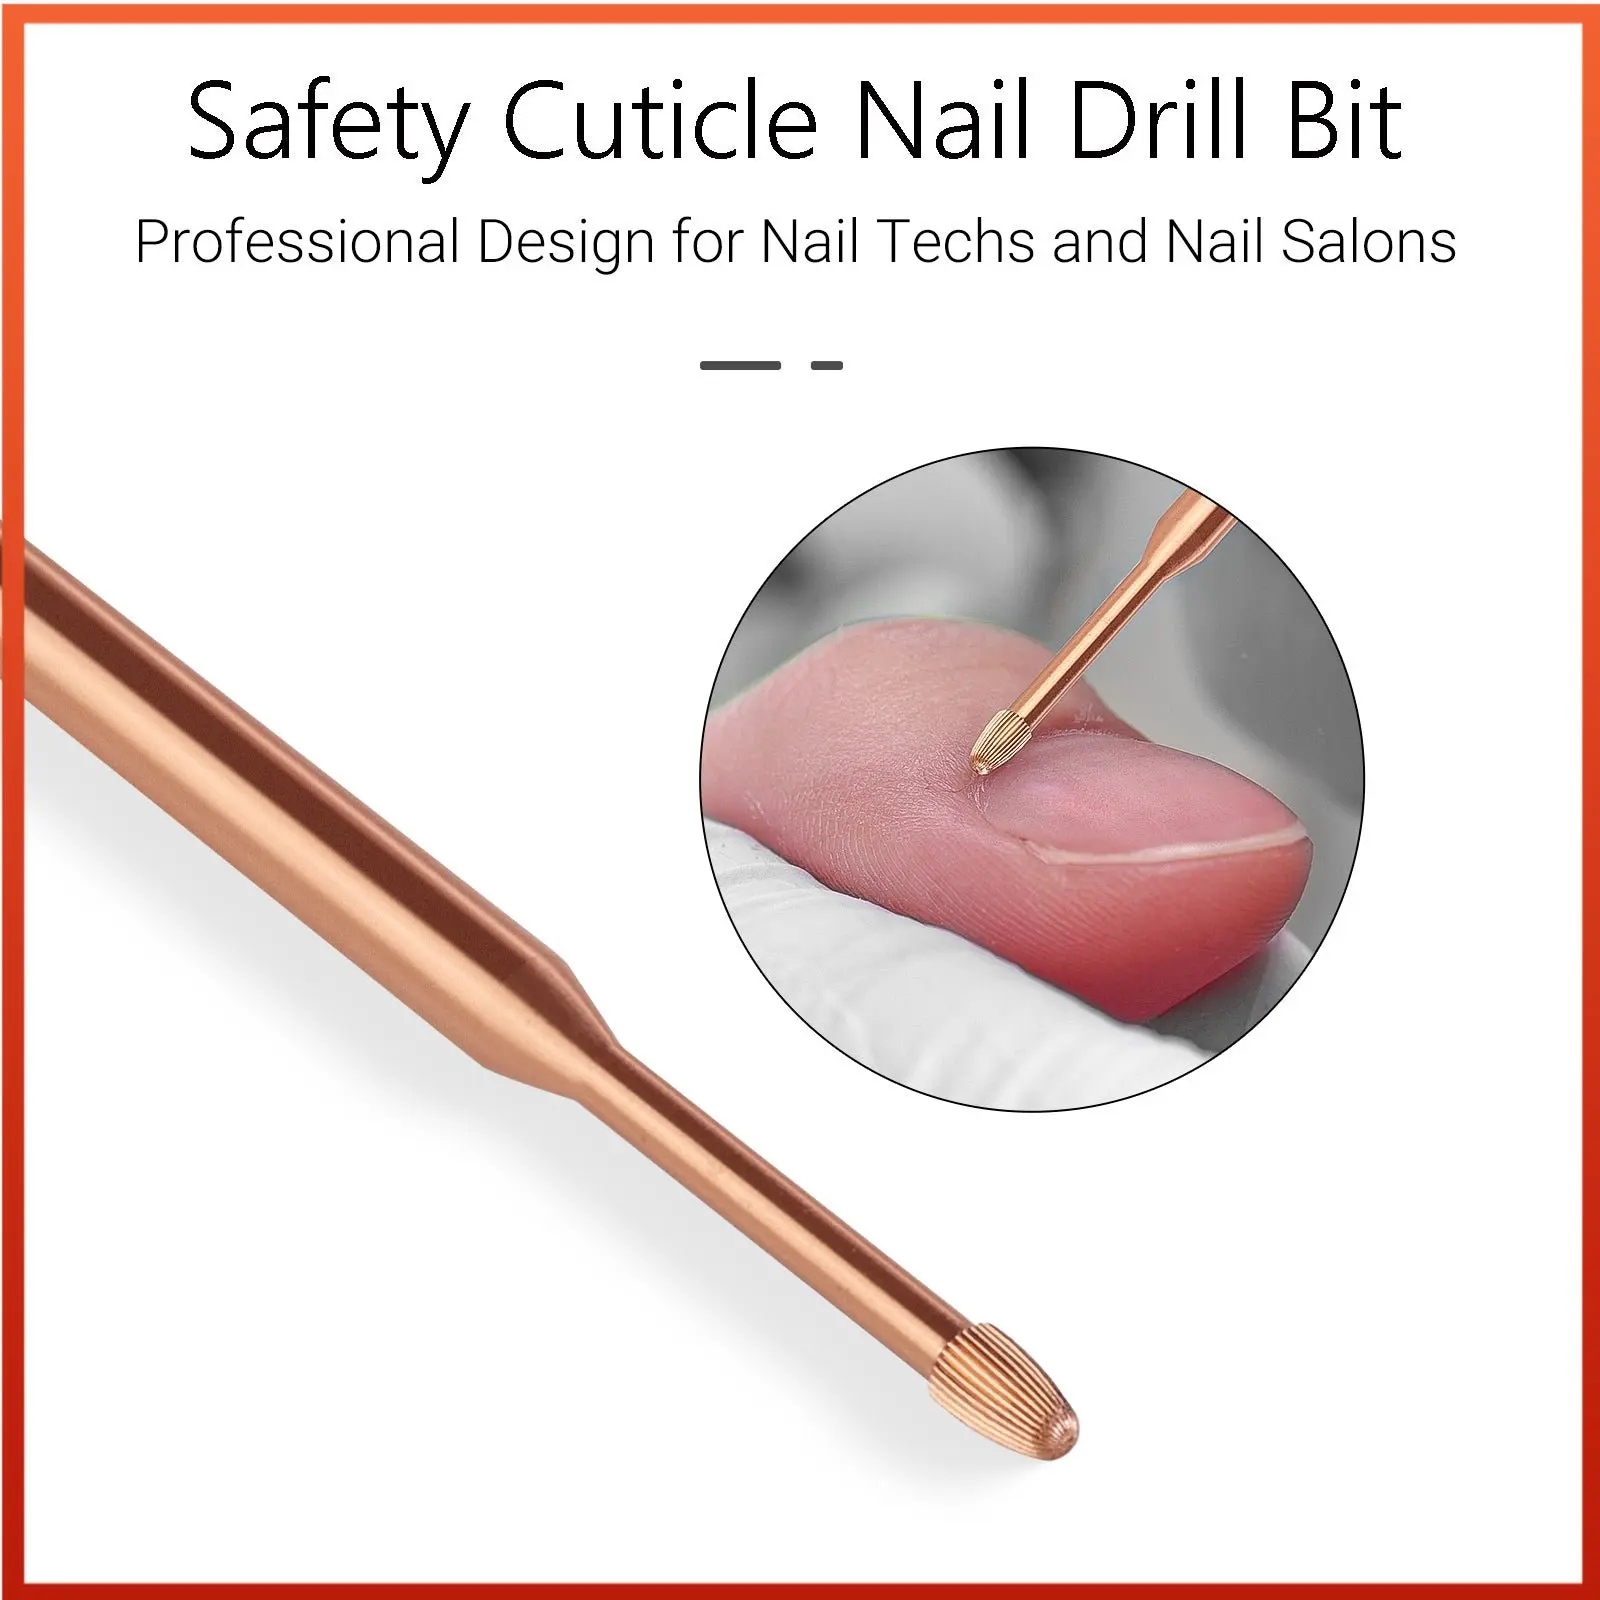 

Cuticle Clean Drill Bit for Nails Safety Carbide Milling Cutter Cuticle Remover Cuuuetr for Dead Skin Nail Prepare Rose Gold